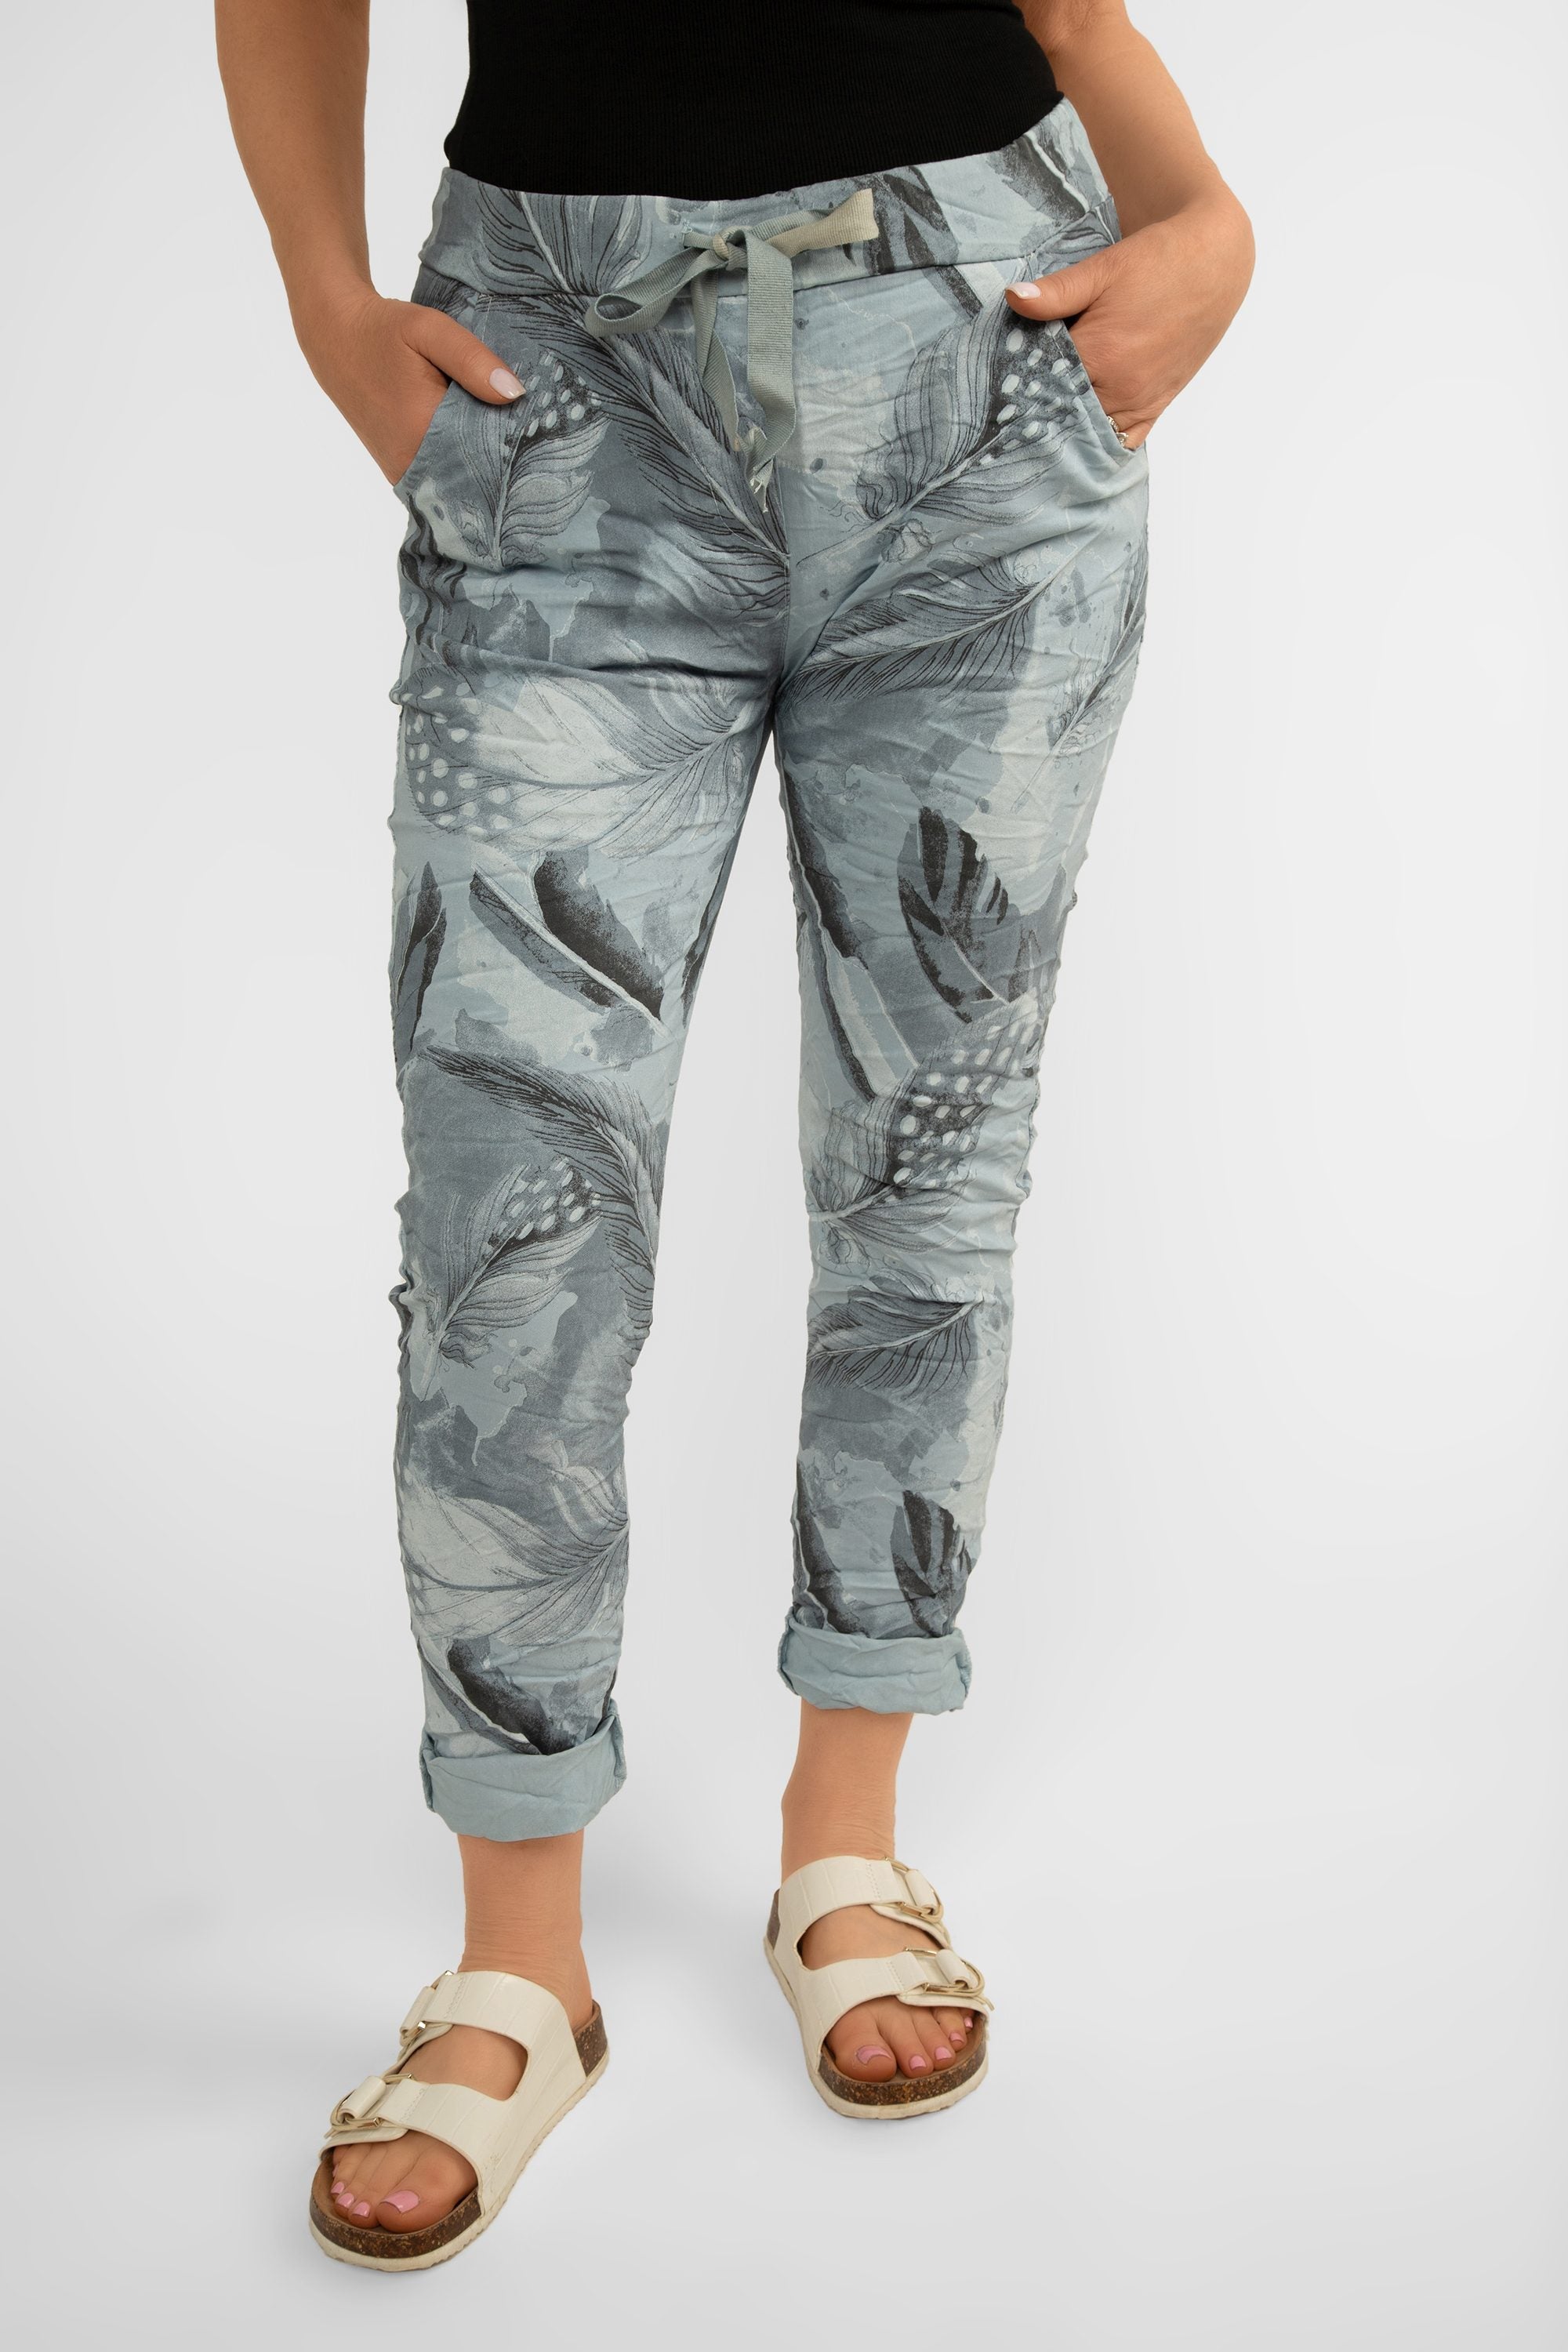 Front view of Bella Amore (21144) Women's Slim Fit Cropped Crinkle Pants with Side Pockets, Pull-on waist in Sky Blue Feather Print